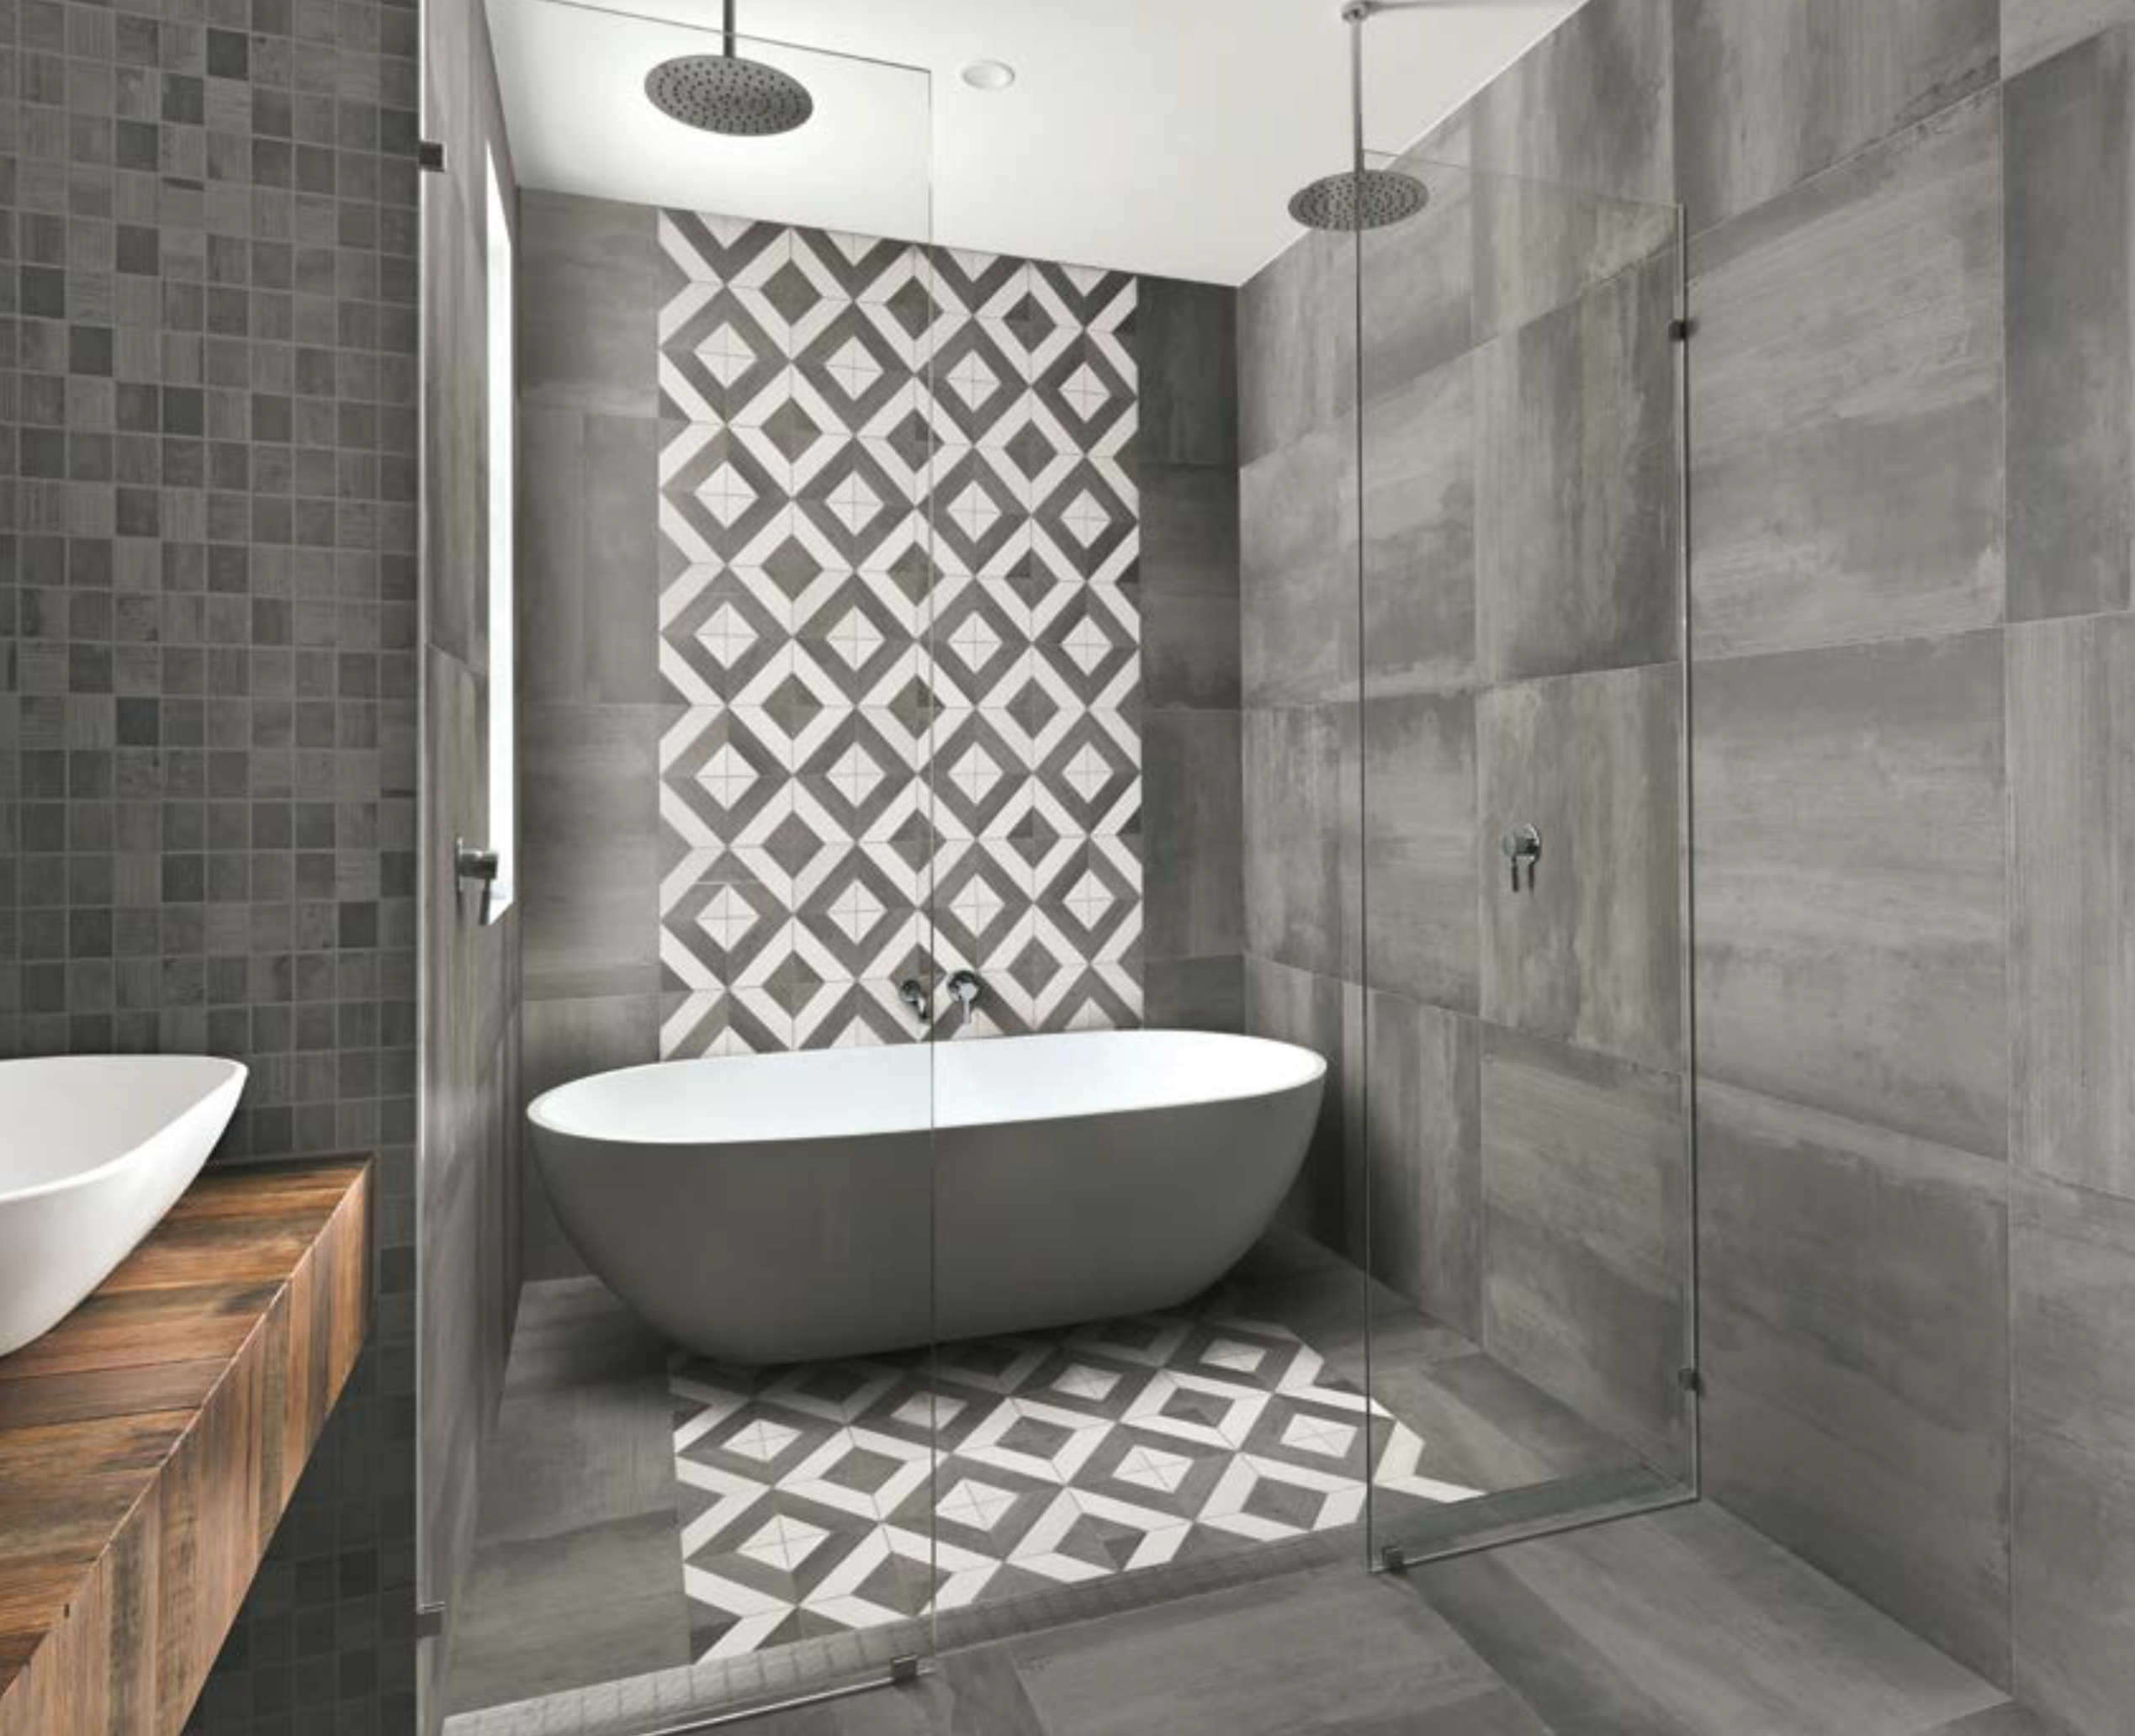 Shows a catalog scene featuring a mid tone bathroom with stark contrast between a black and white deco shower and concrete industrial tones on the walls of the bathroom